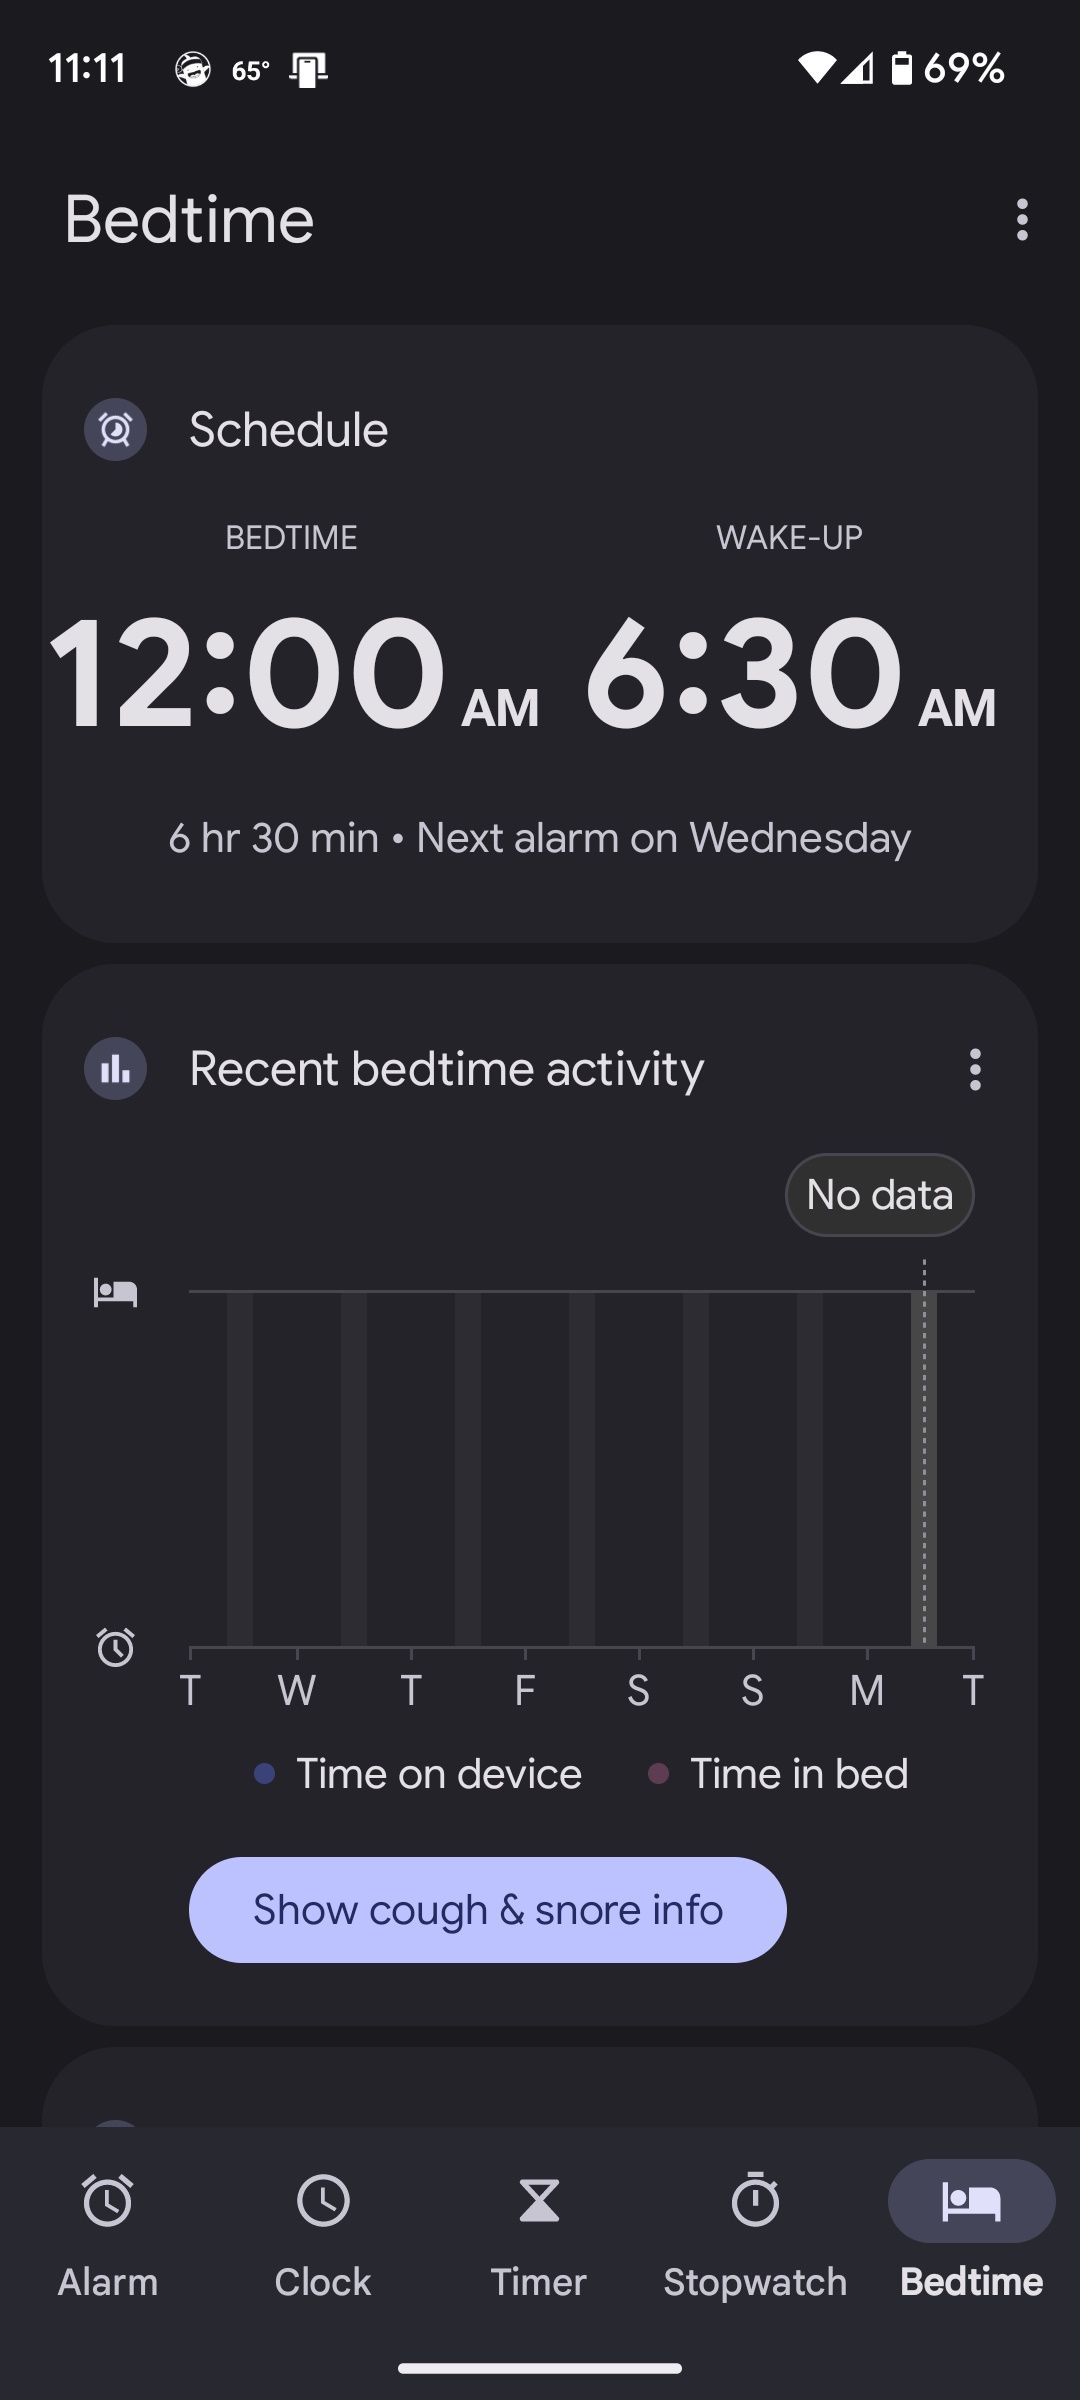 Scheduling a bed time and wake up time in Bedtime Mode in the Android Clock app